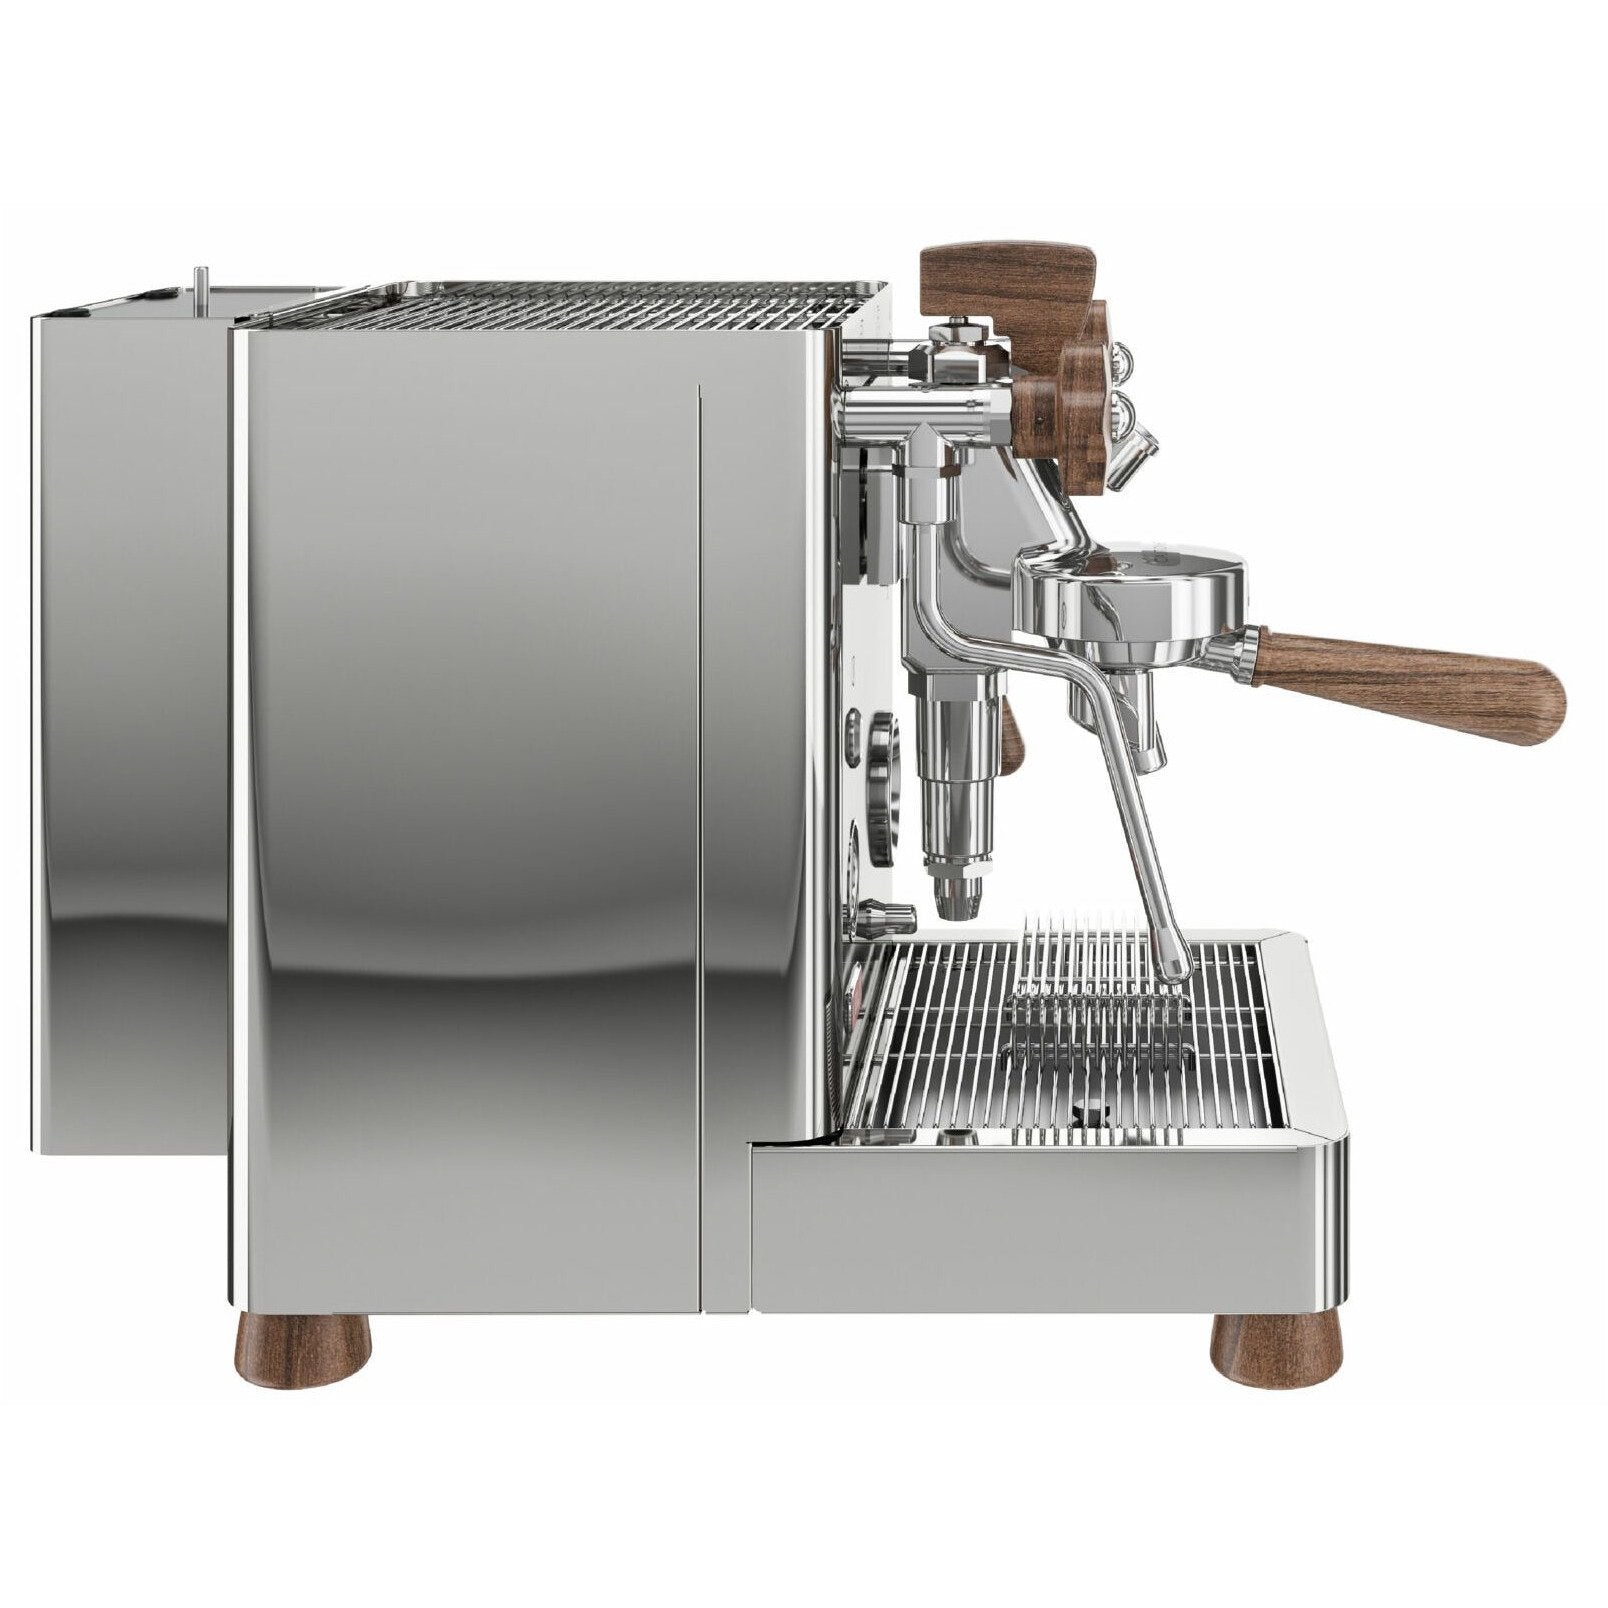 Manual no-tank espresso machine with group heater and pressure gauge